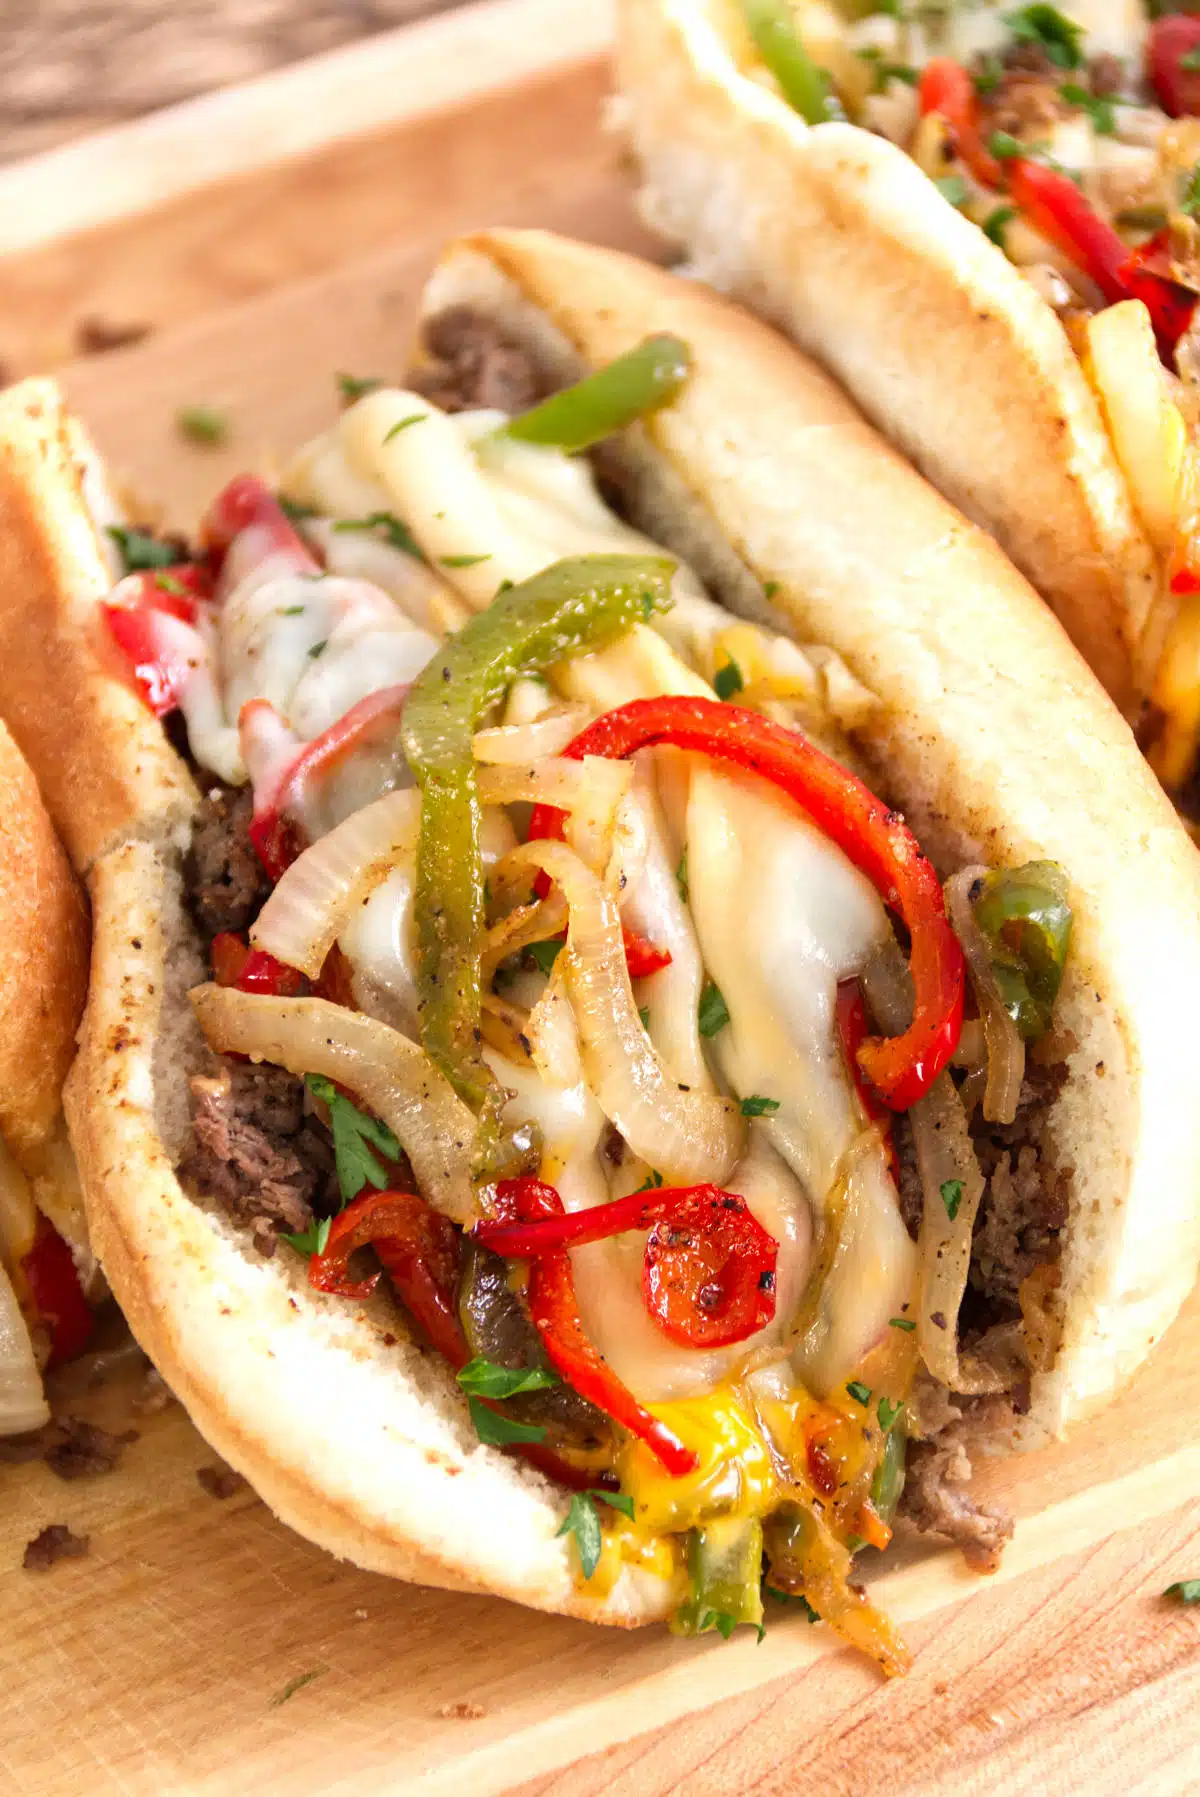 Meat, cheese, and bell peppers in a hoagie roll.